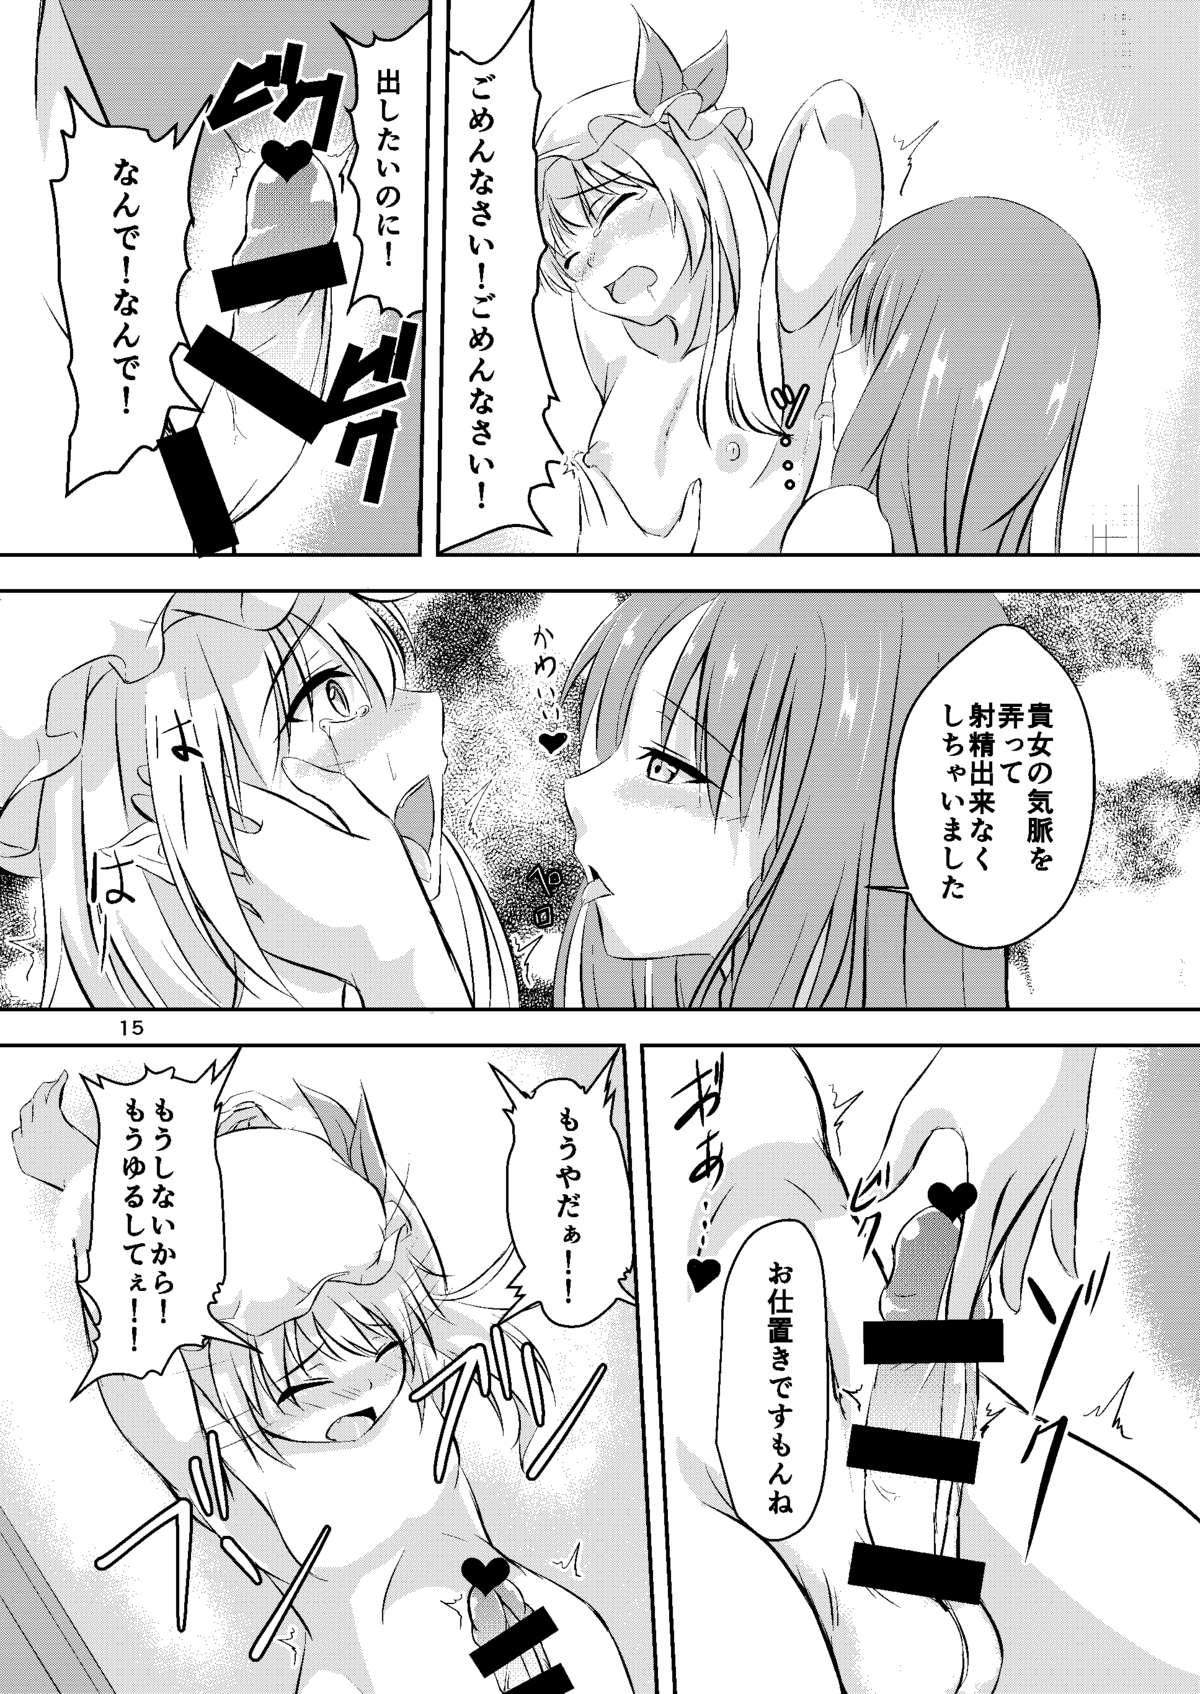 Blond 幻想男娘紅魔館!フランドール - Touhou project Small Boobs - Page 7